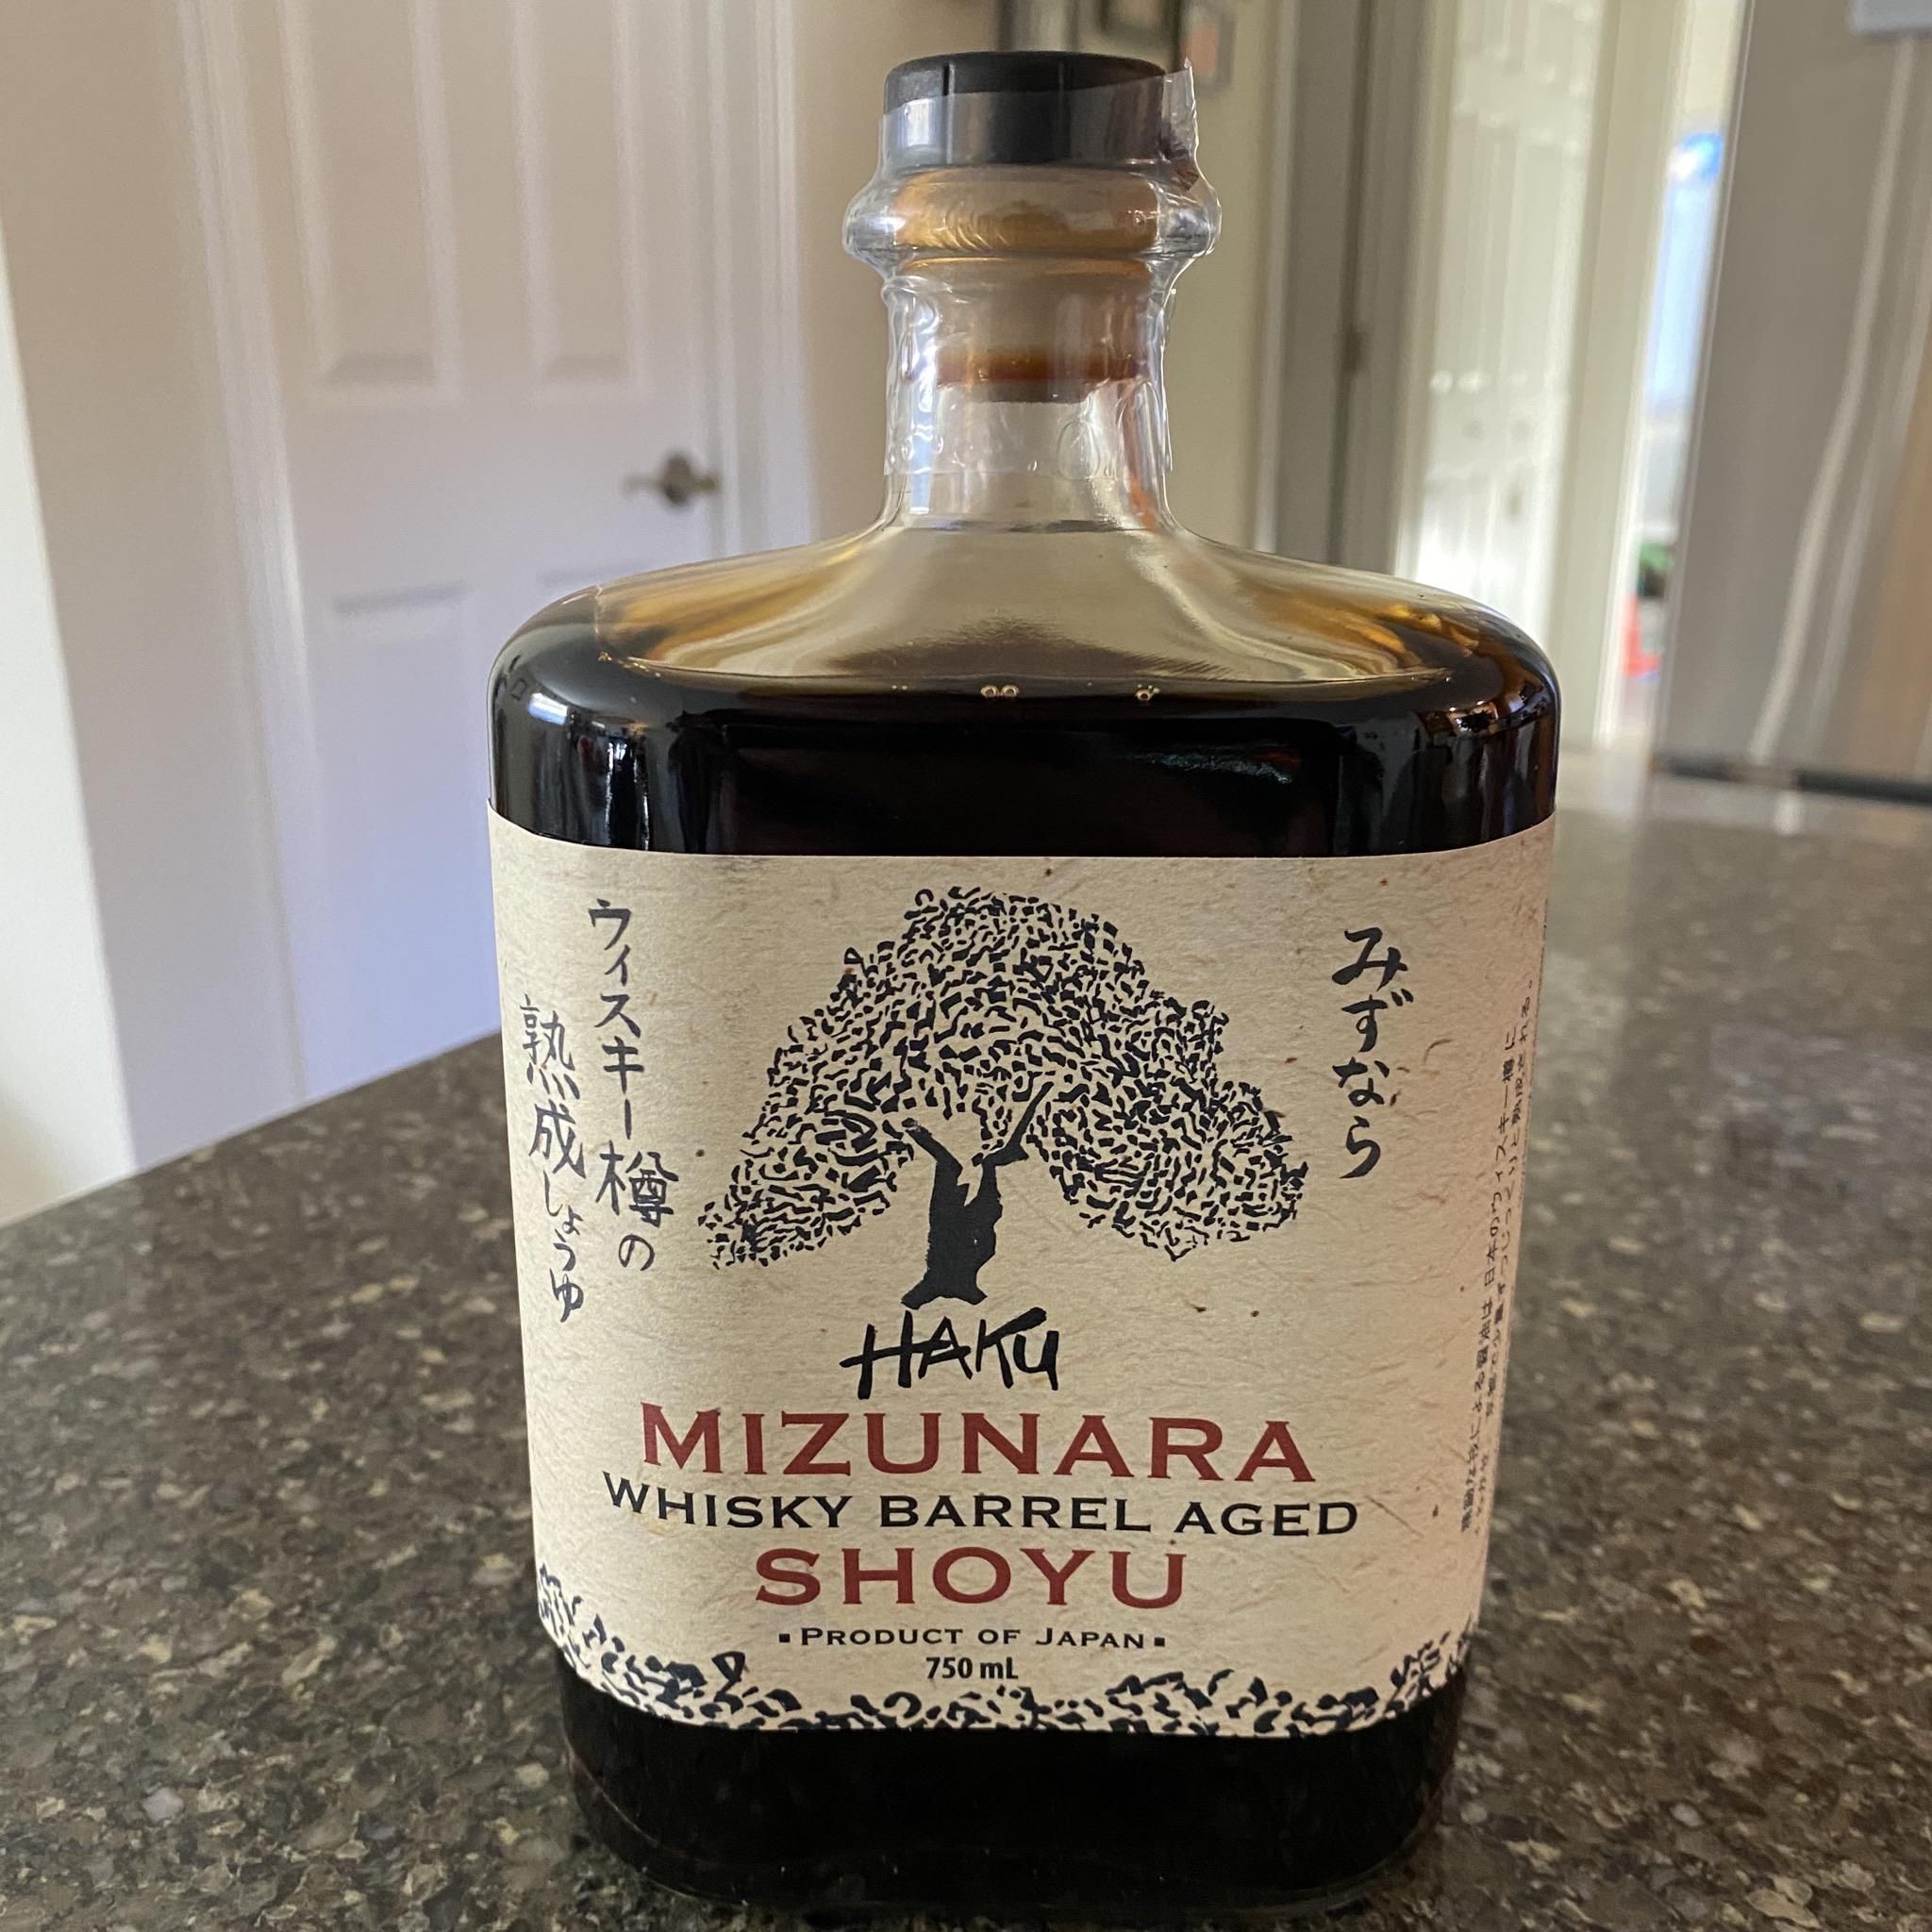 Sister-in-law orders a Japanese whiskey for me every Christmas. I don’t think she read the description this time when she shipped me a $50 bottle of soy sauce.